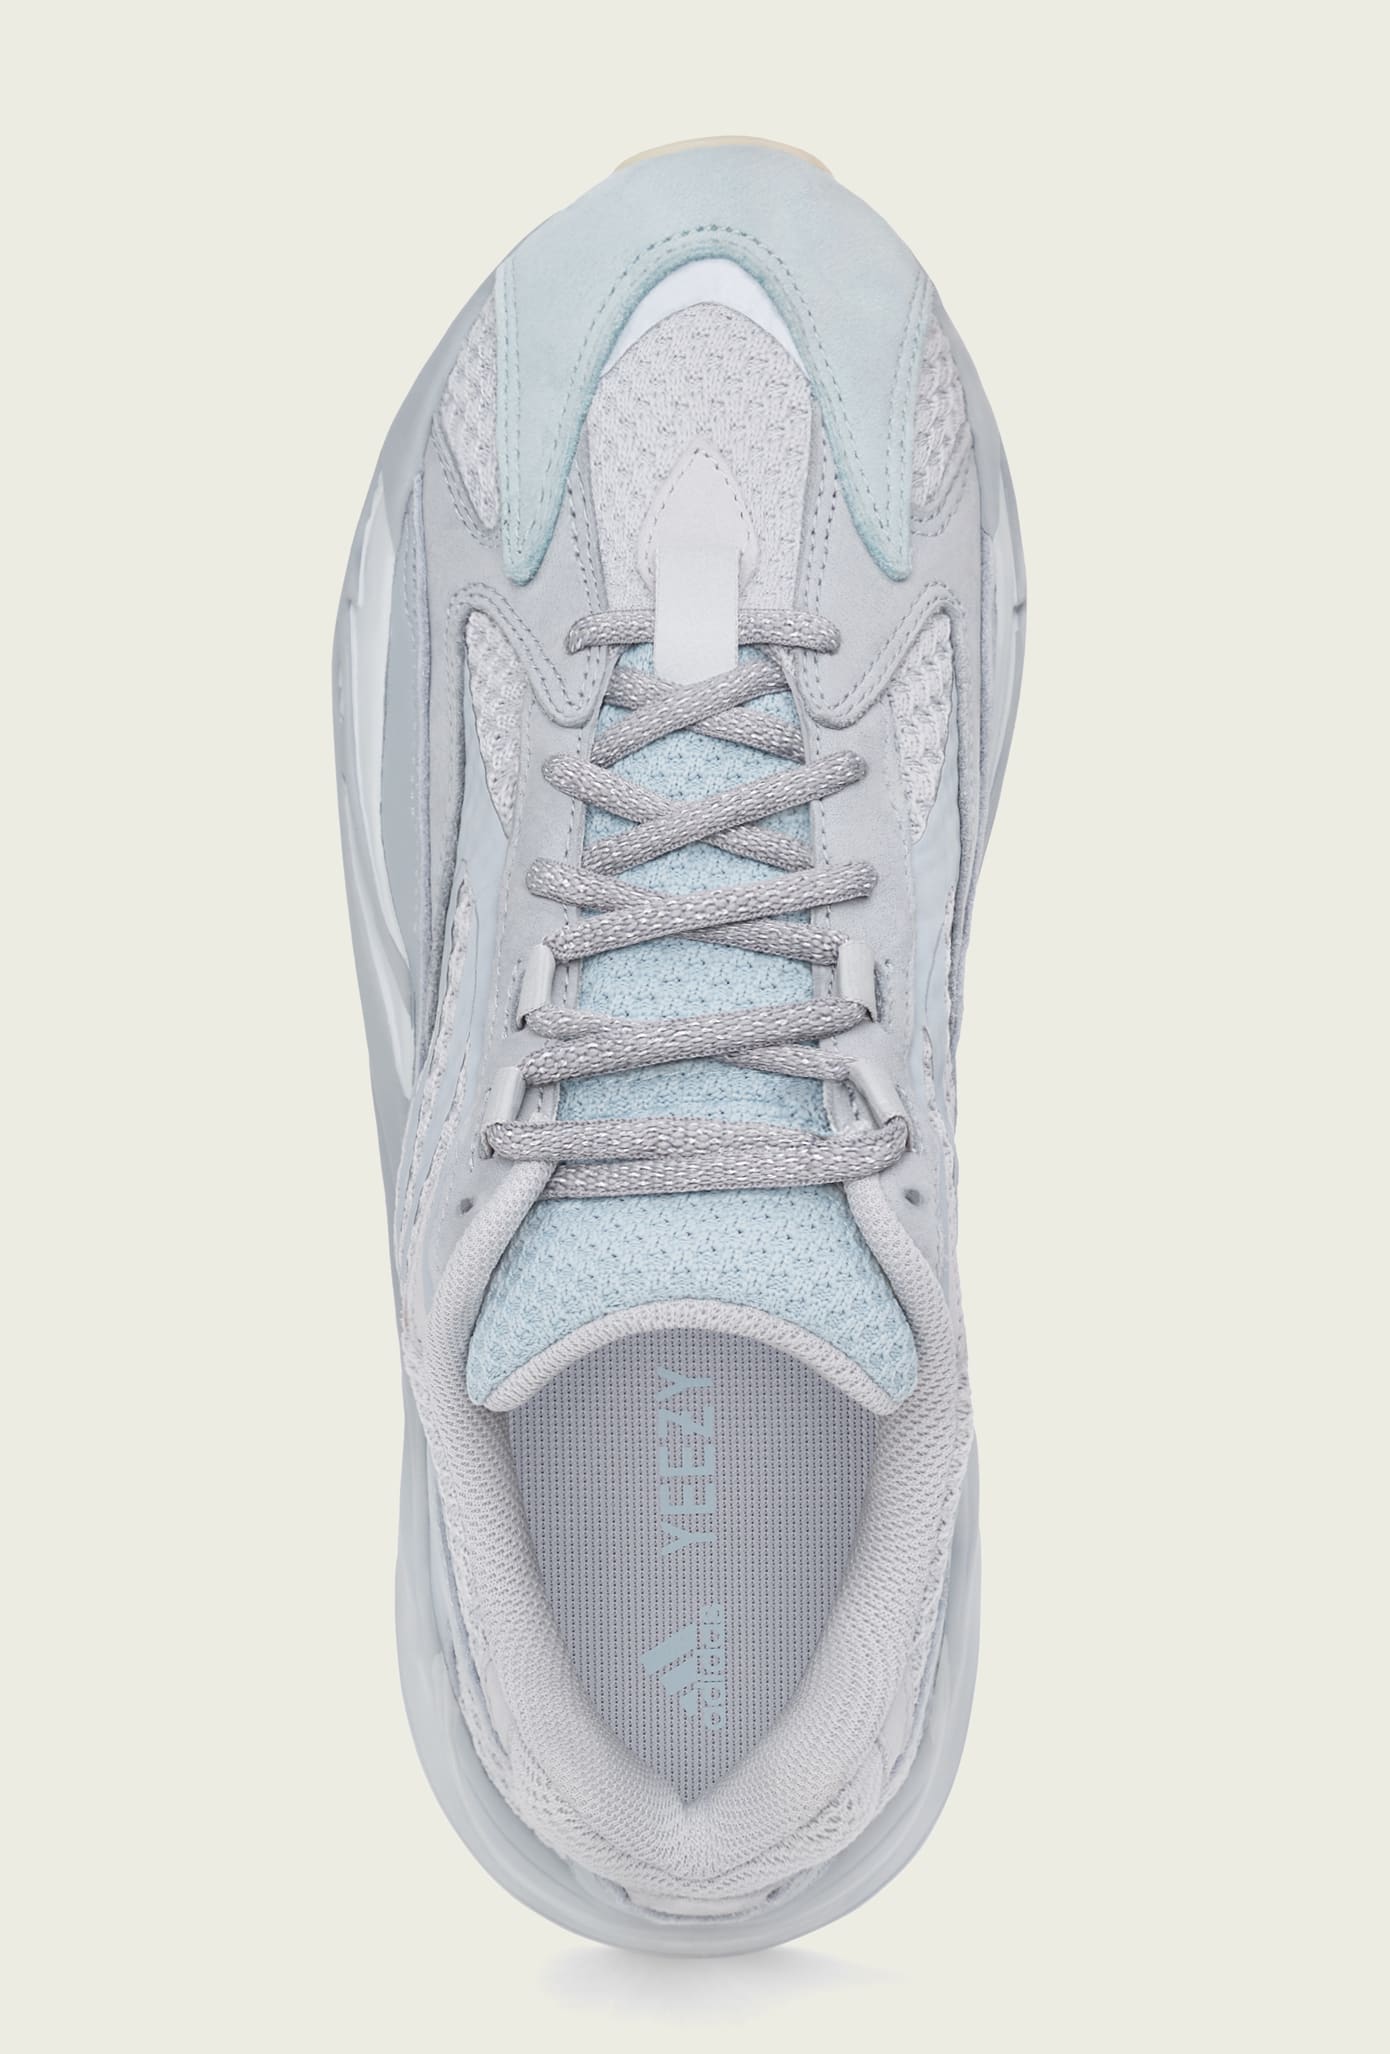 Adidas Yeezy Boost 700 V2 &quot;Inertia&quot; Release Date Confirmed: Official Photos